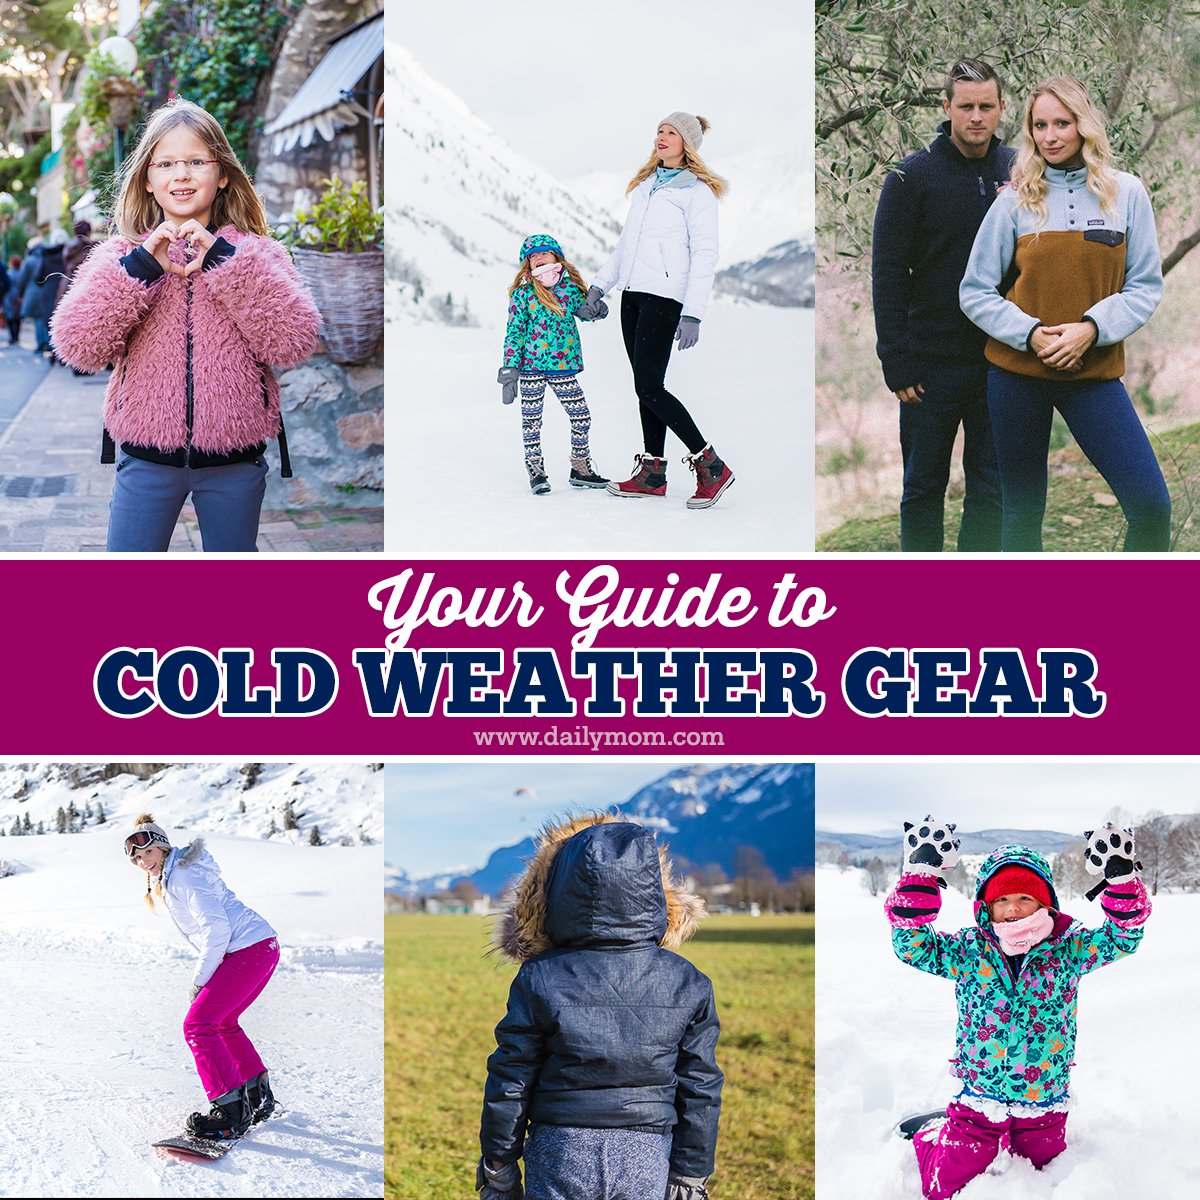 Your Guide To Cold Weather Gear: Cold Weather Clothes To Keep You Warm And  Dry- Daily Mom